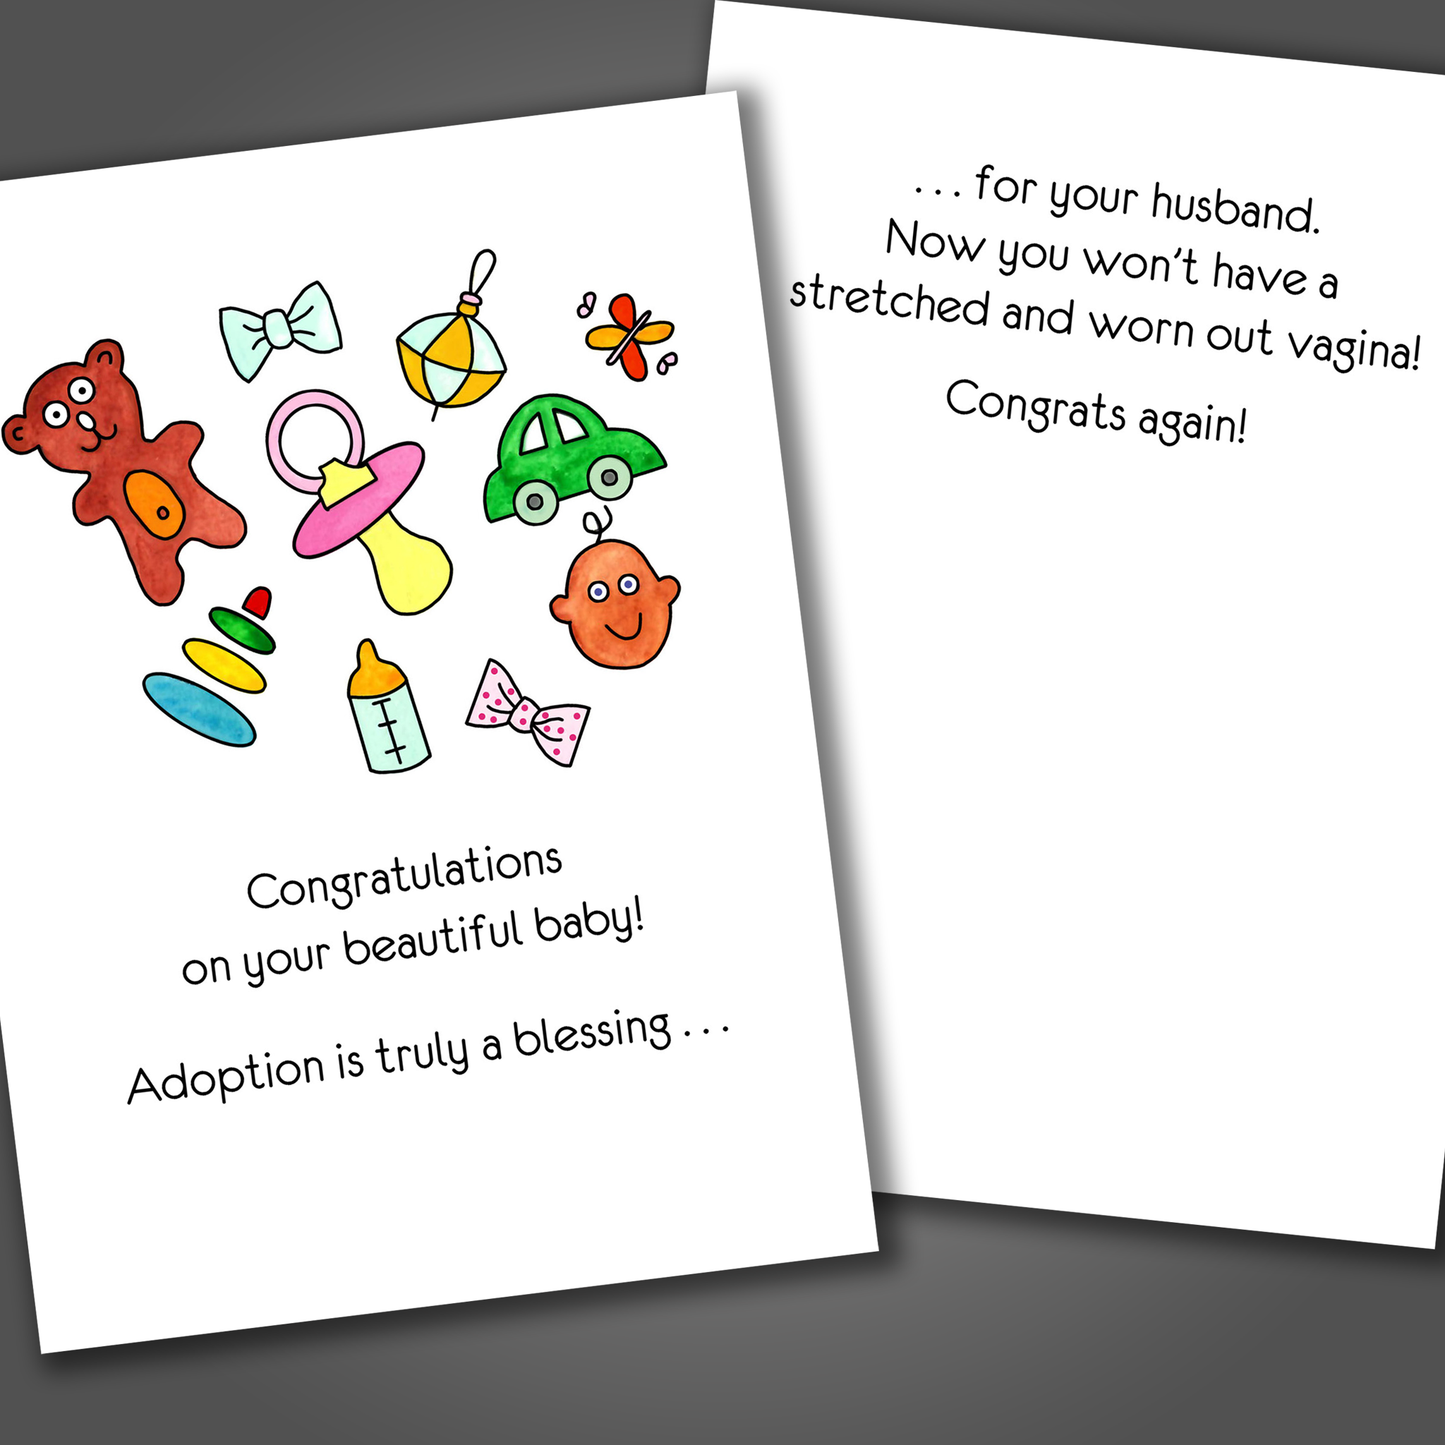 Funny card for new baby or adoption with baby toys on the front of card. Inside is a funny joke that says your vagina won't be stretched out because you adopted!